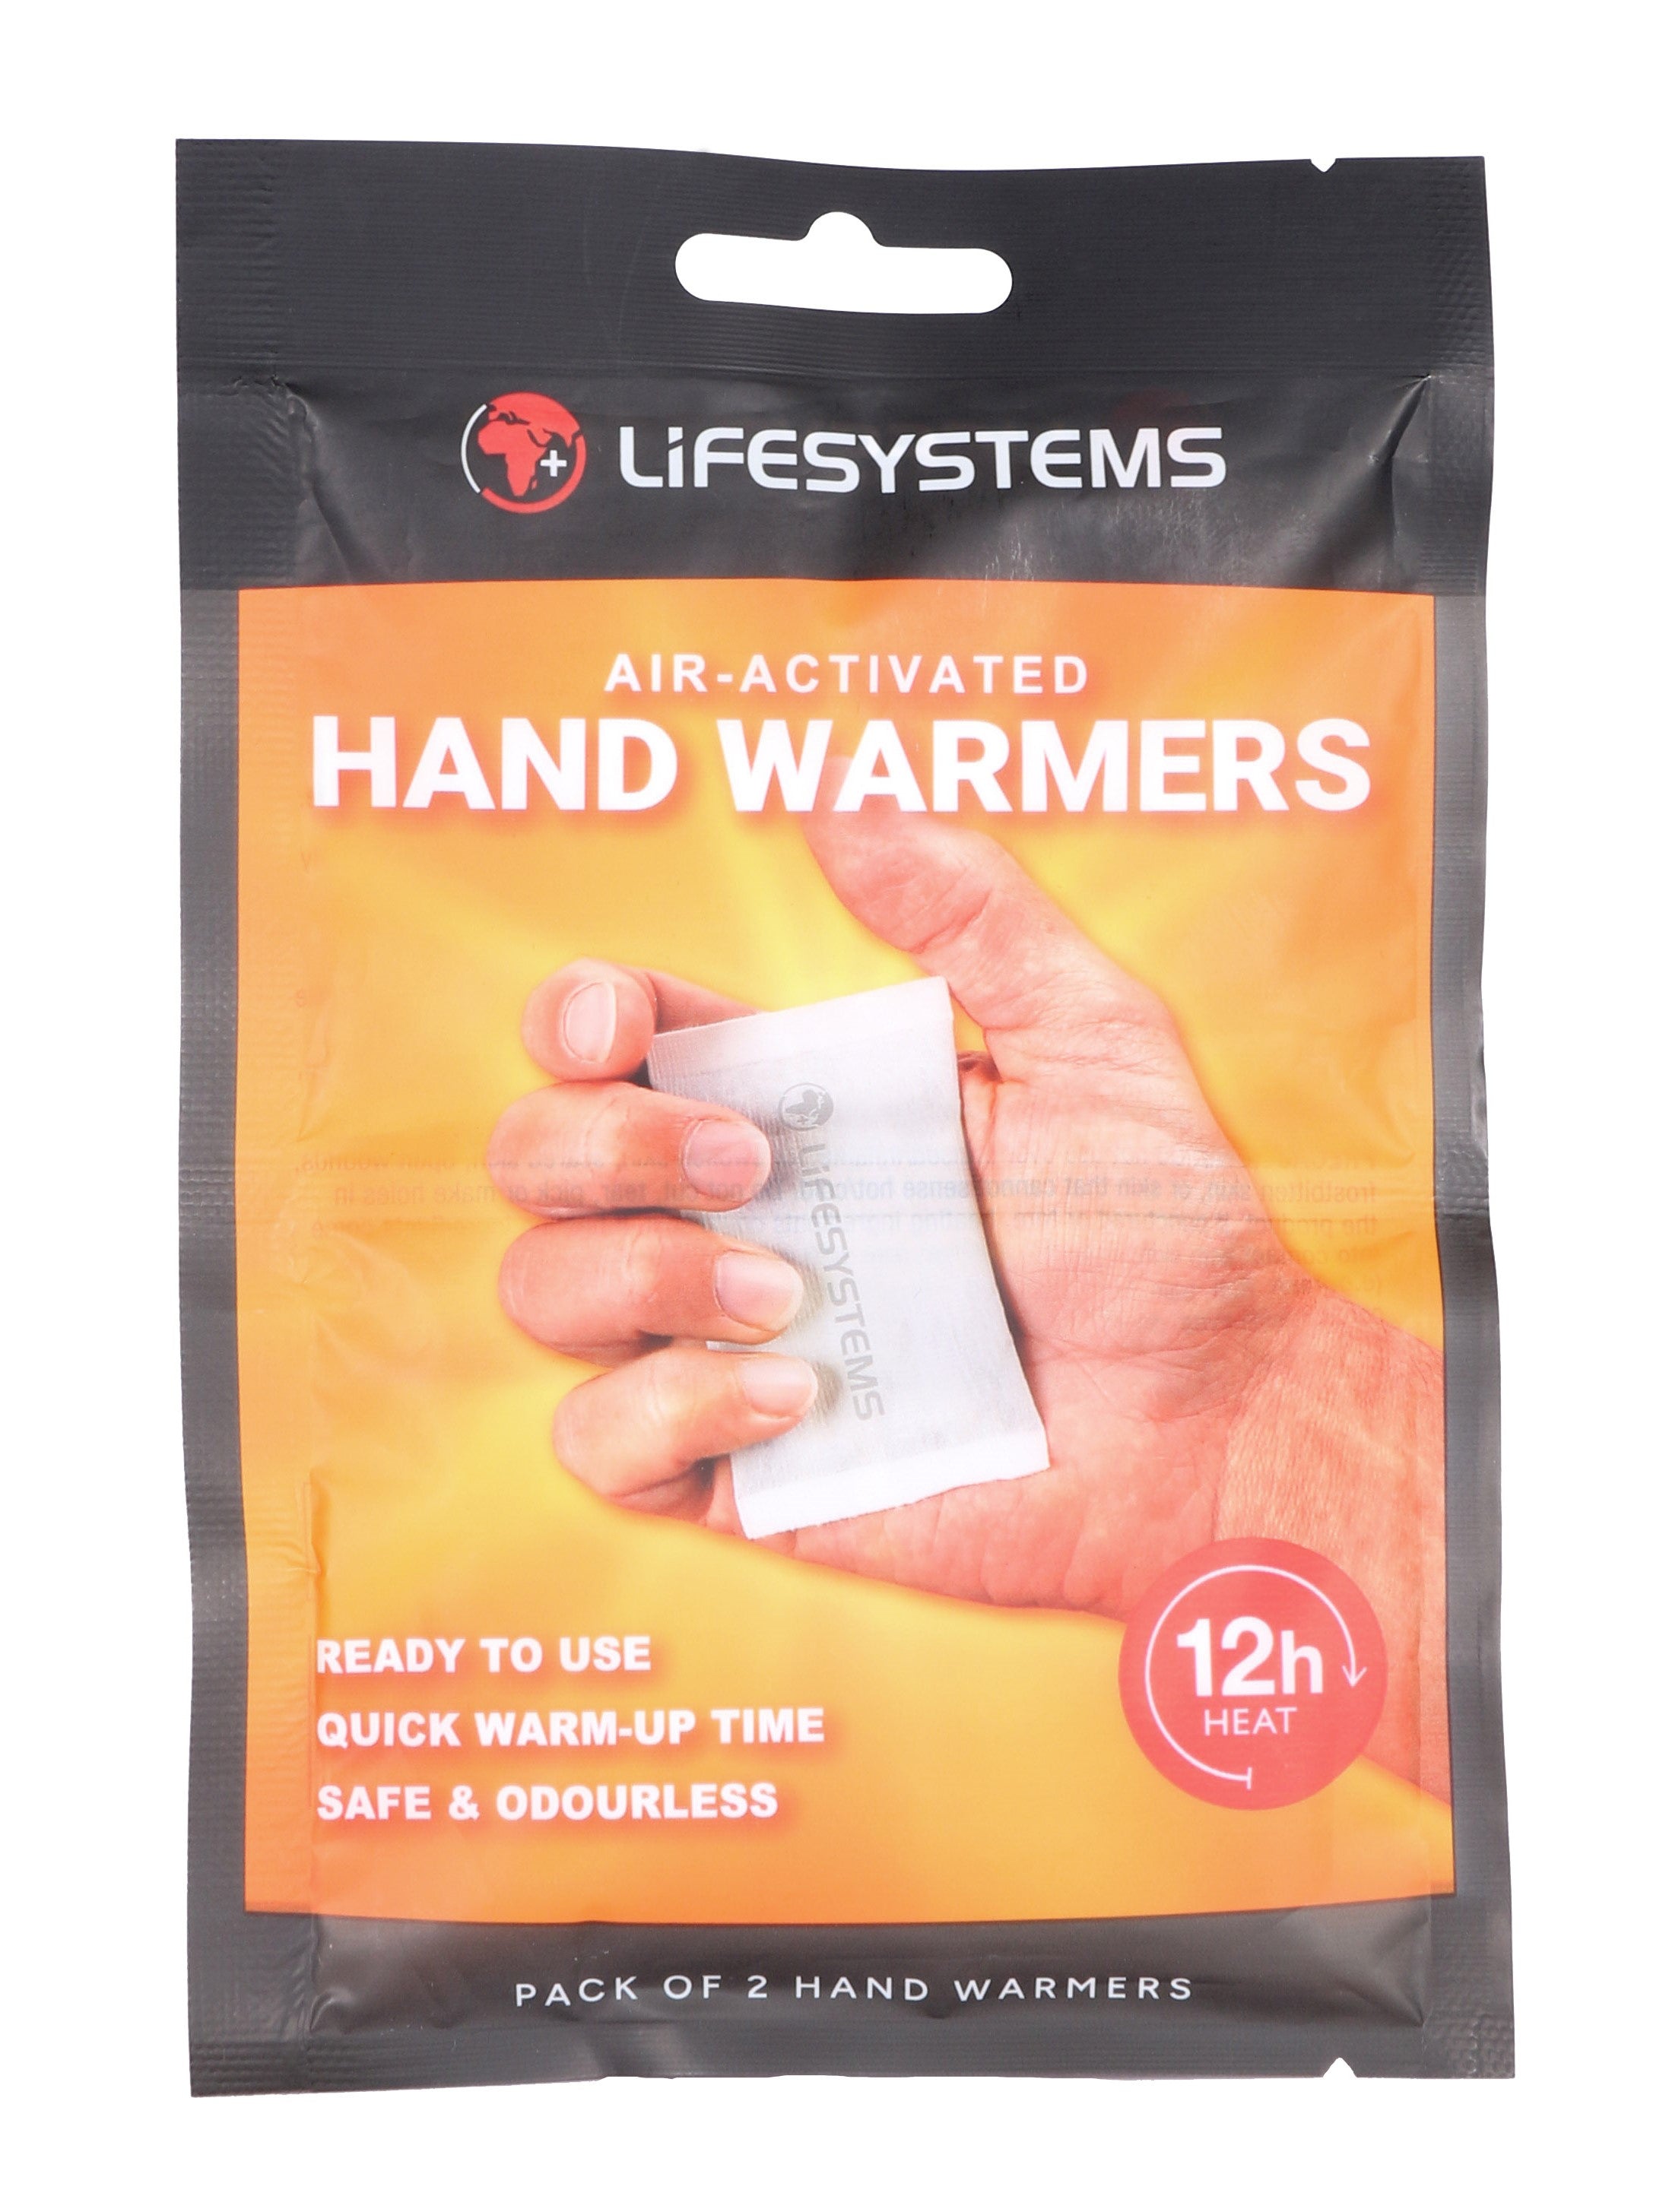 lifesystems air activated hand warmers pack of 2